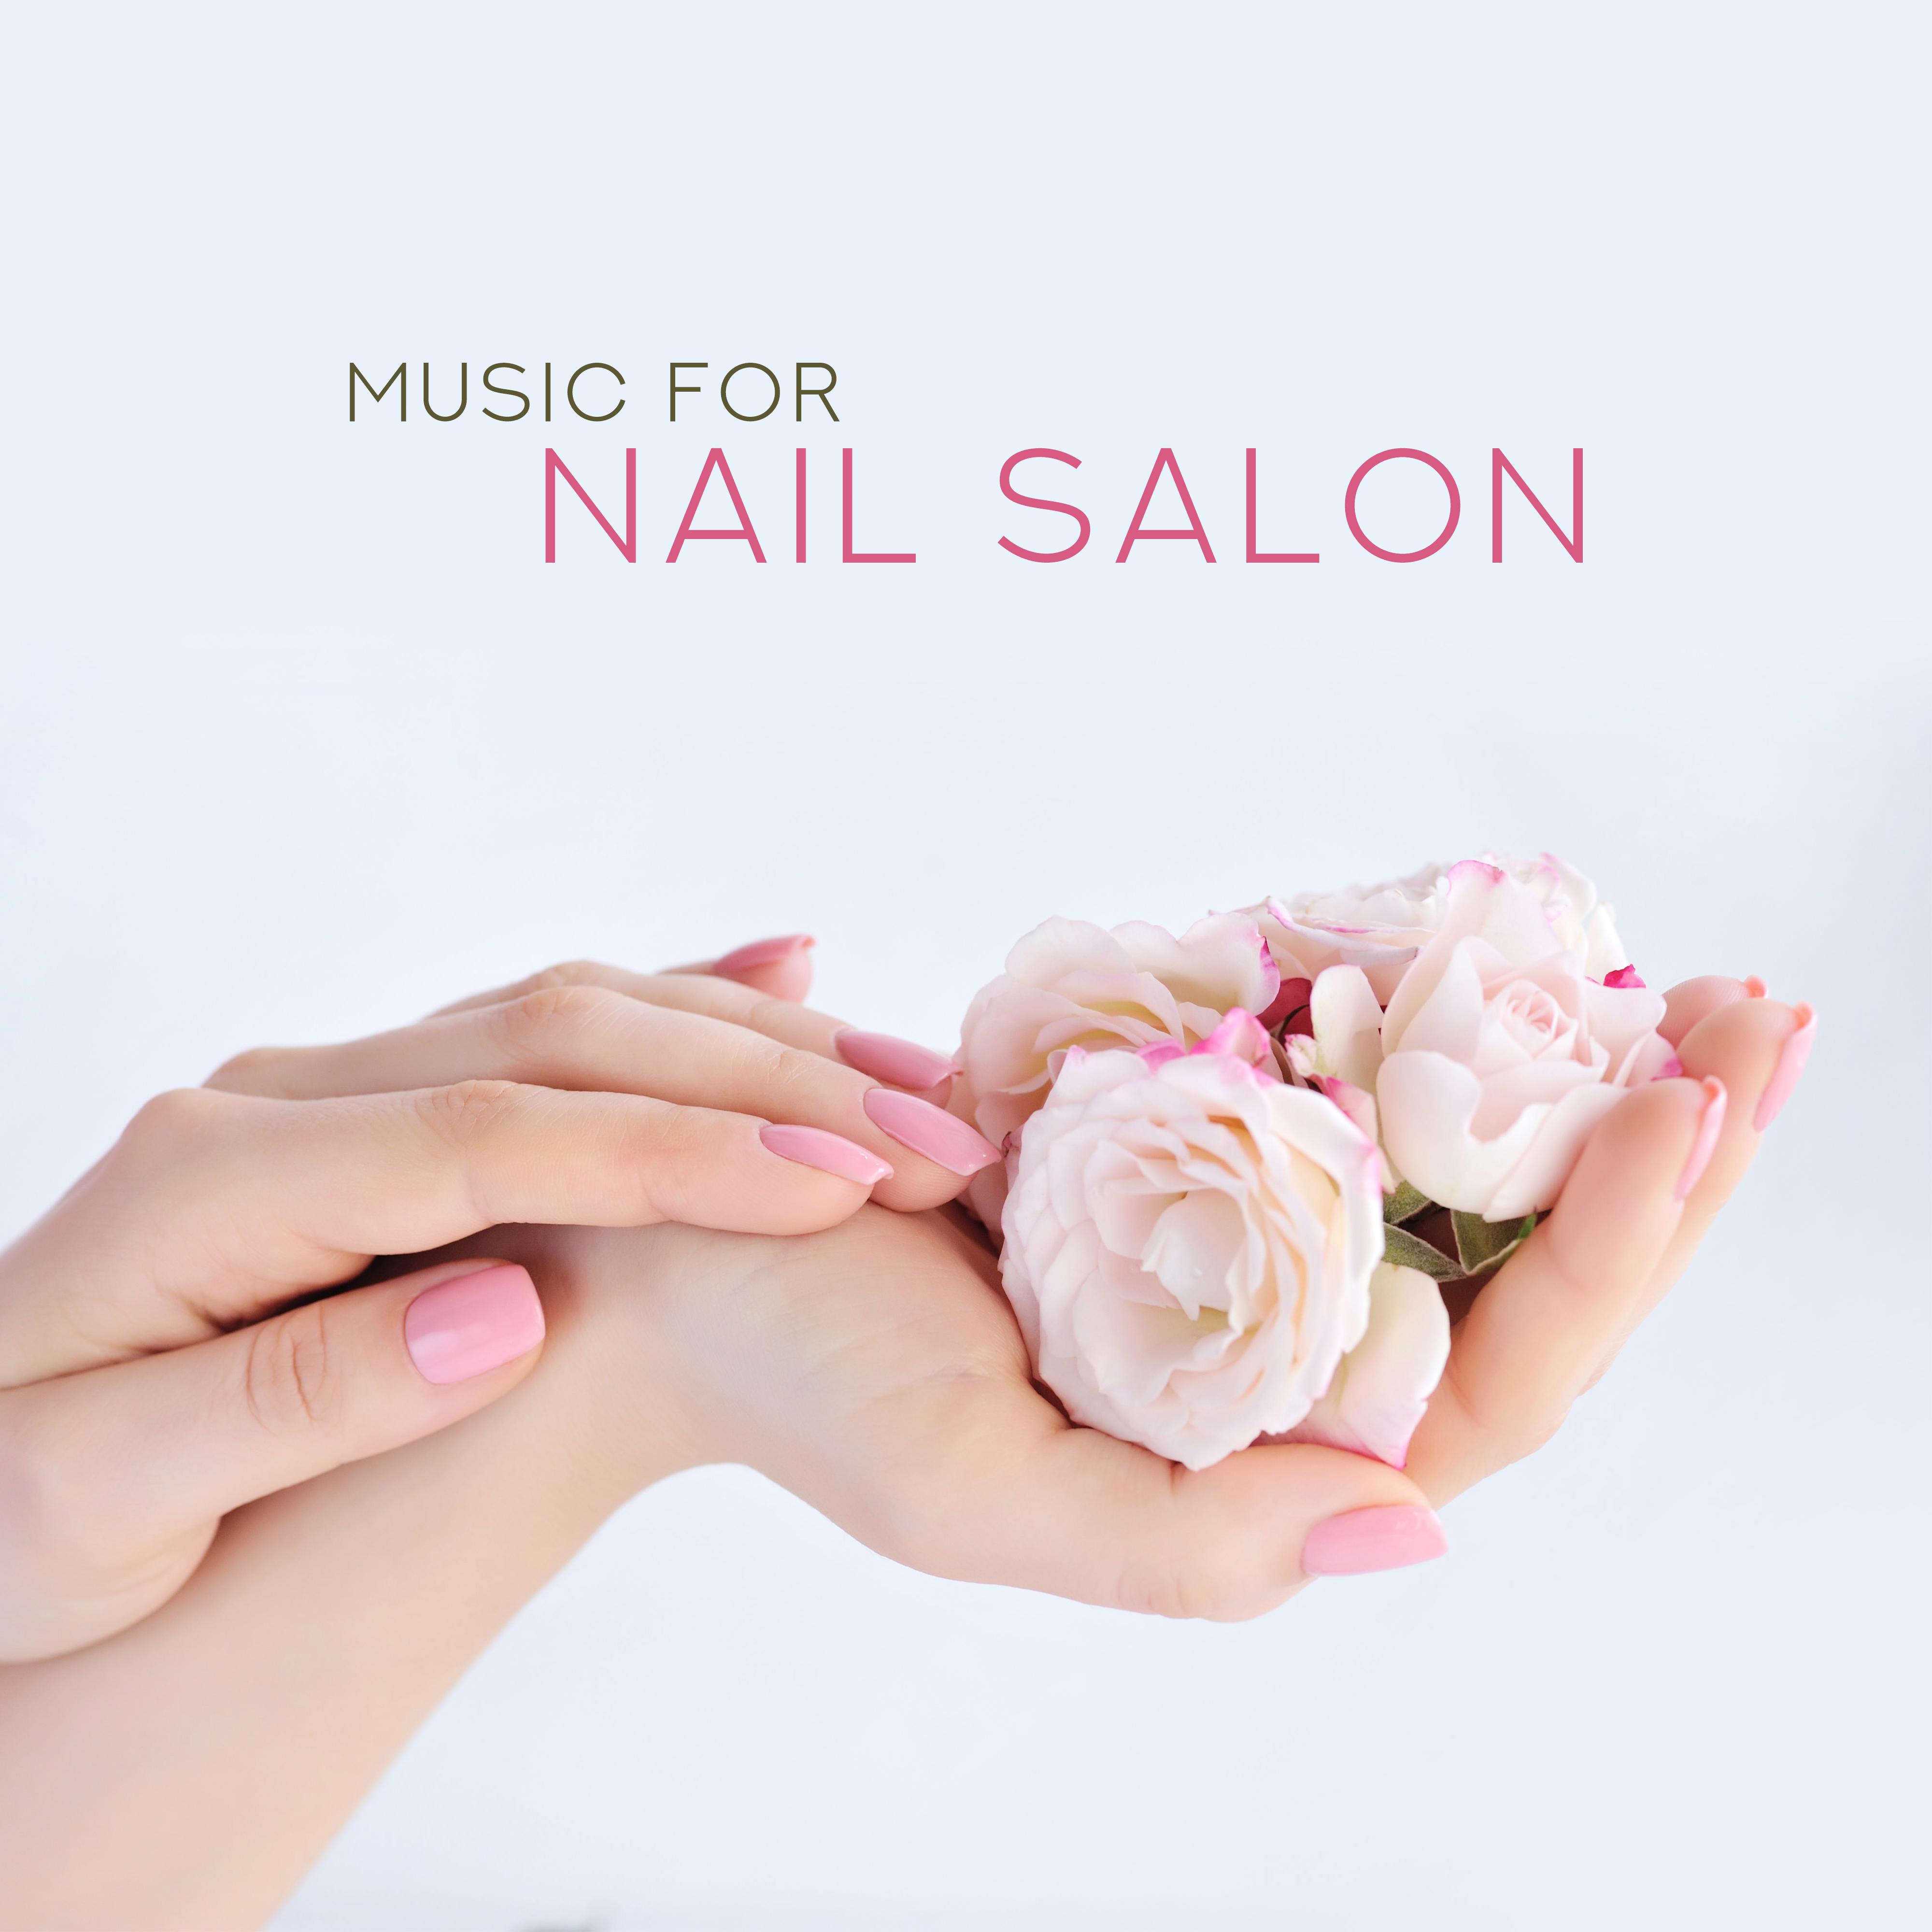 Music for Nail Salon: Modern Chillout 2019, Relaxing Sounds for Beauty Salon, Spa, Massage, Luxury Chill Out for Women